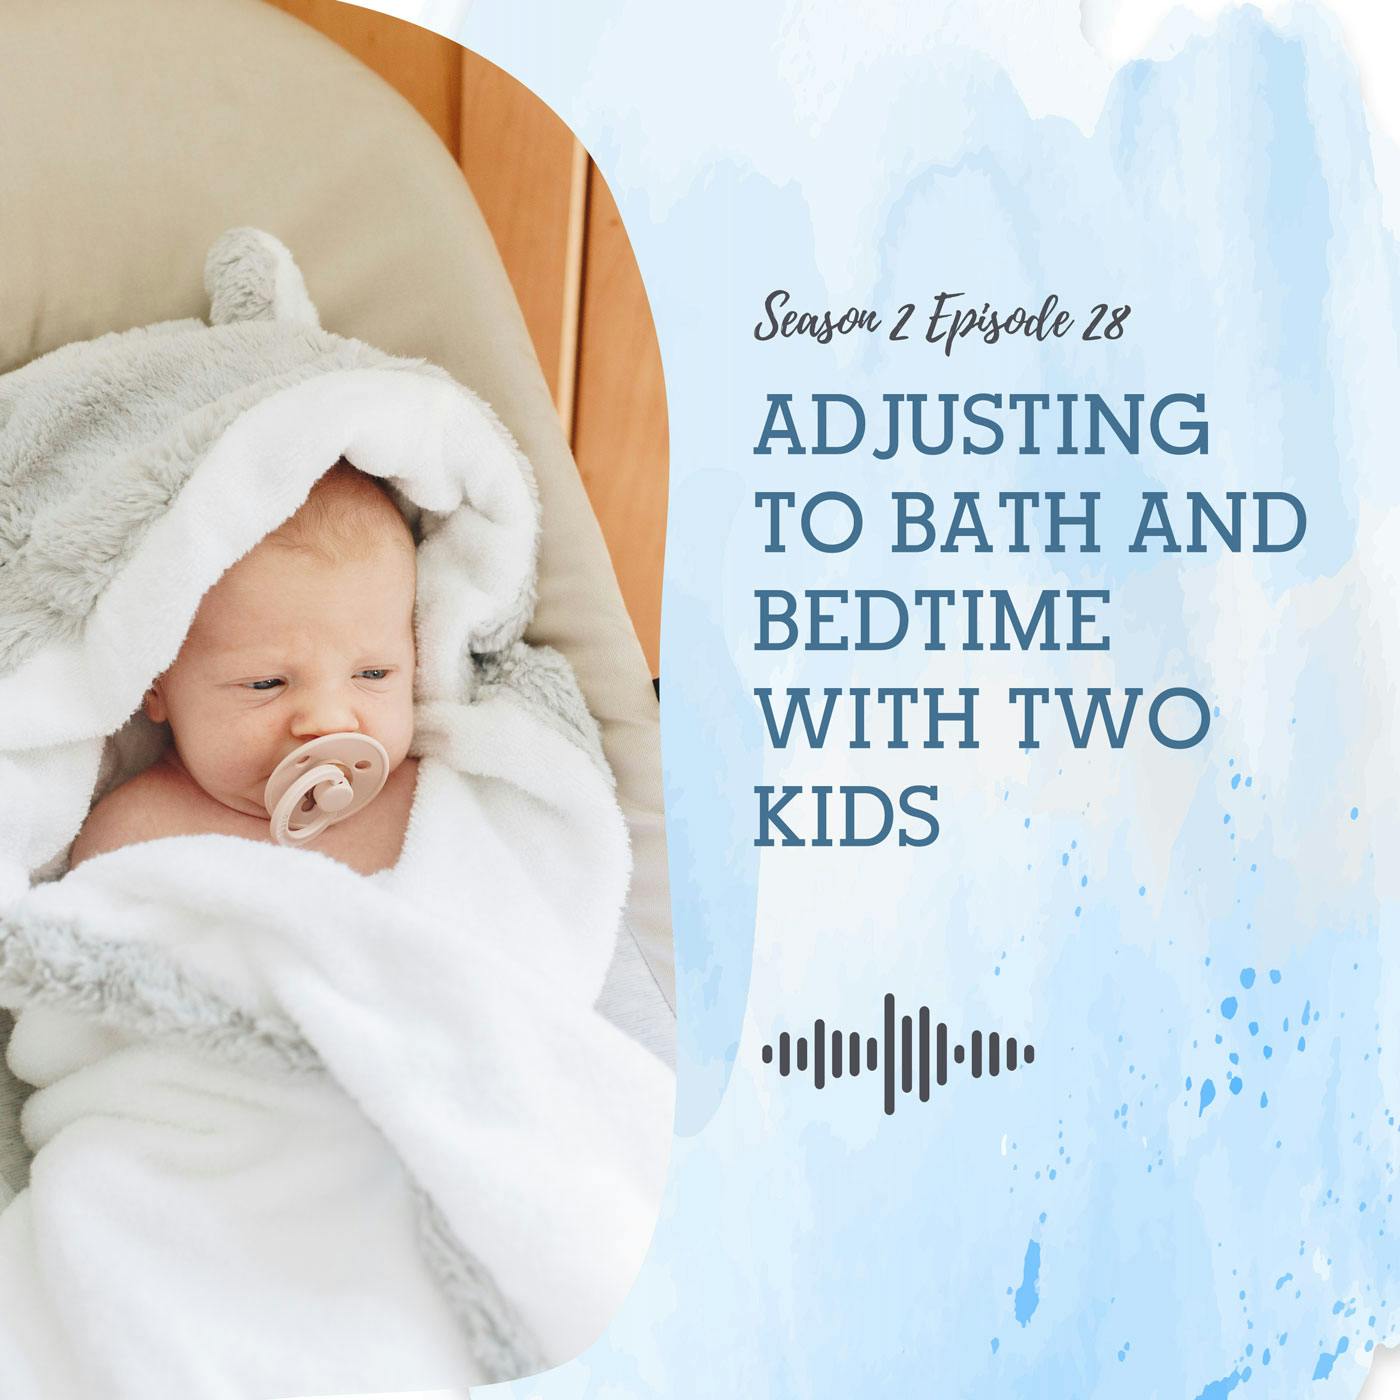 S2 EP28:  ADJUSTING TO BATH AND BEDTIME WITH TWO KIDS